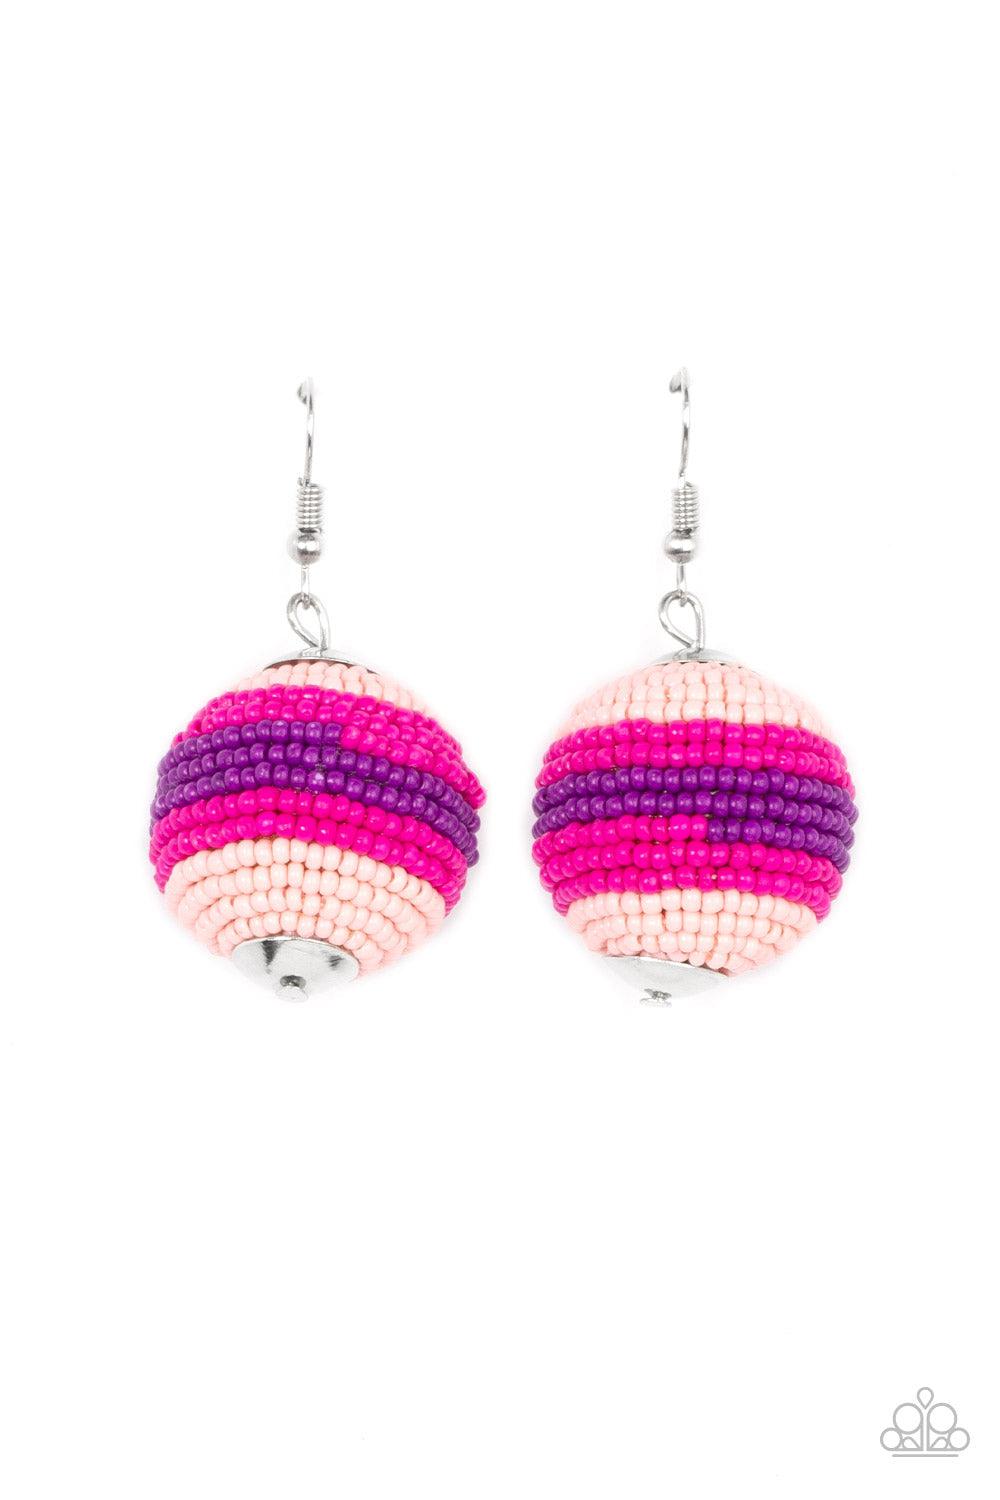 Zest Fest Pink Seed Bead Earrings - Paparazzi Accessories- lightbox - CarasShop.com - $5 Jewelry by Cara Jewels